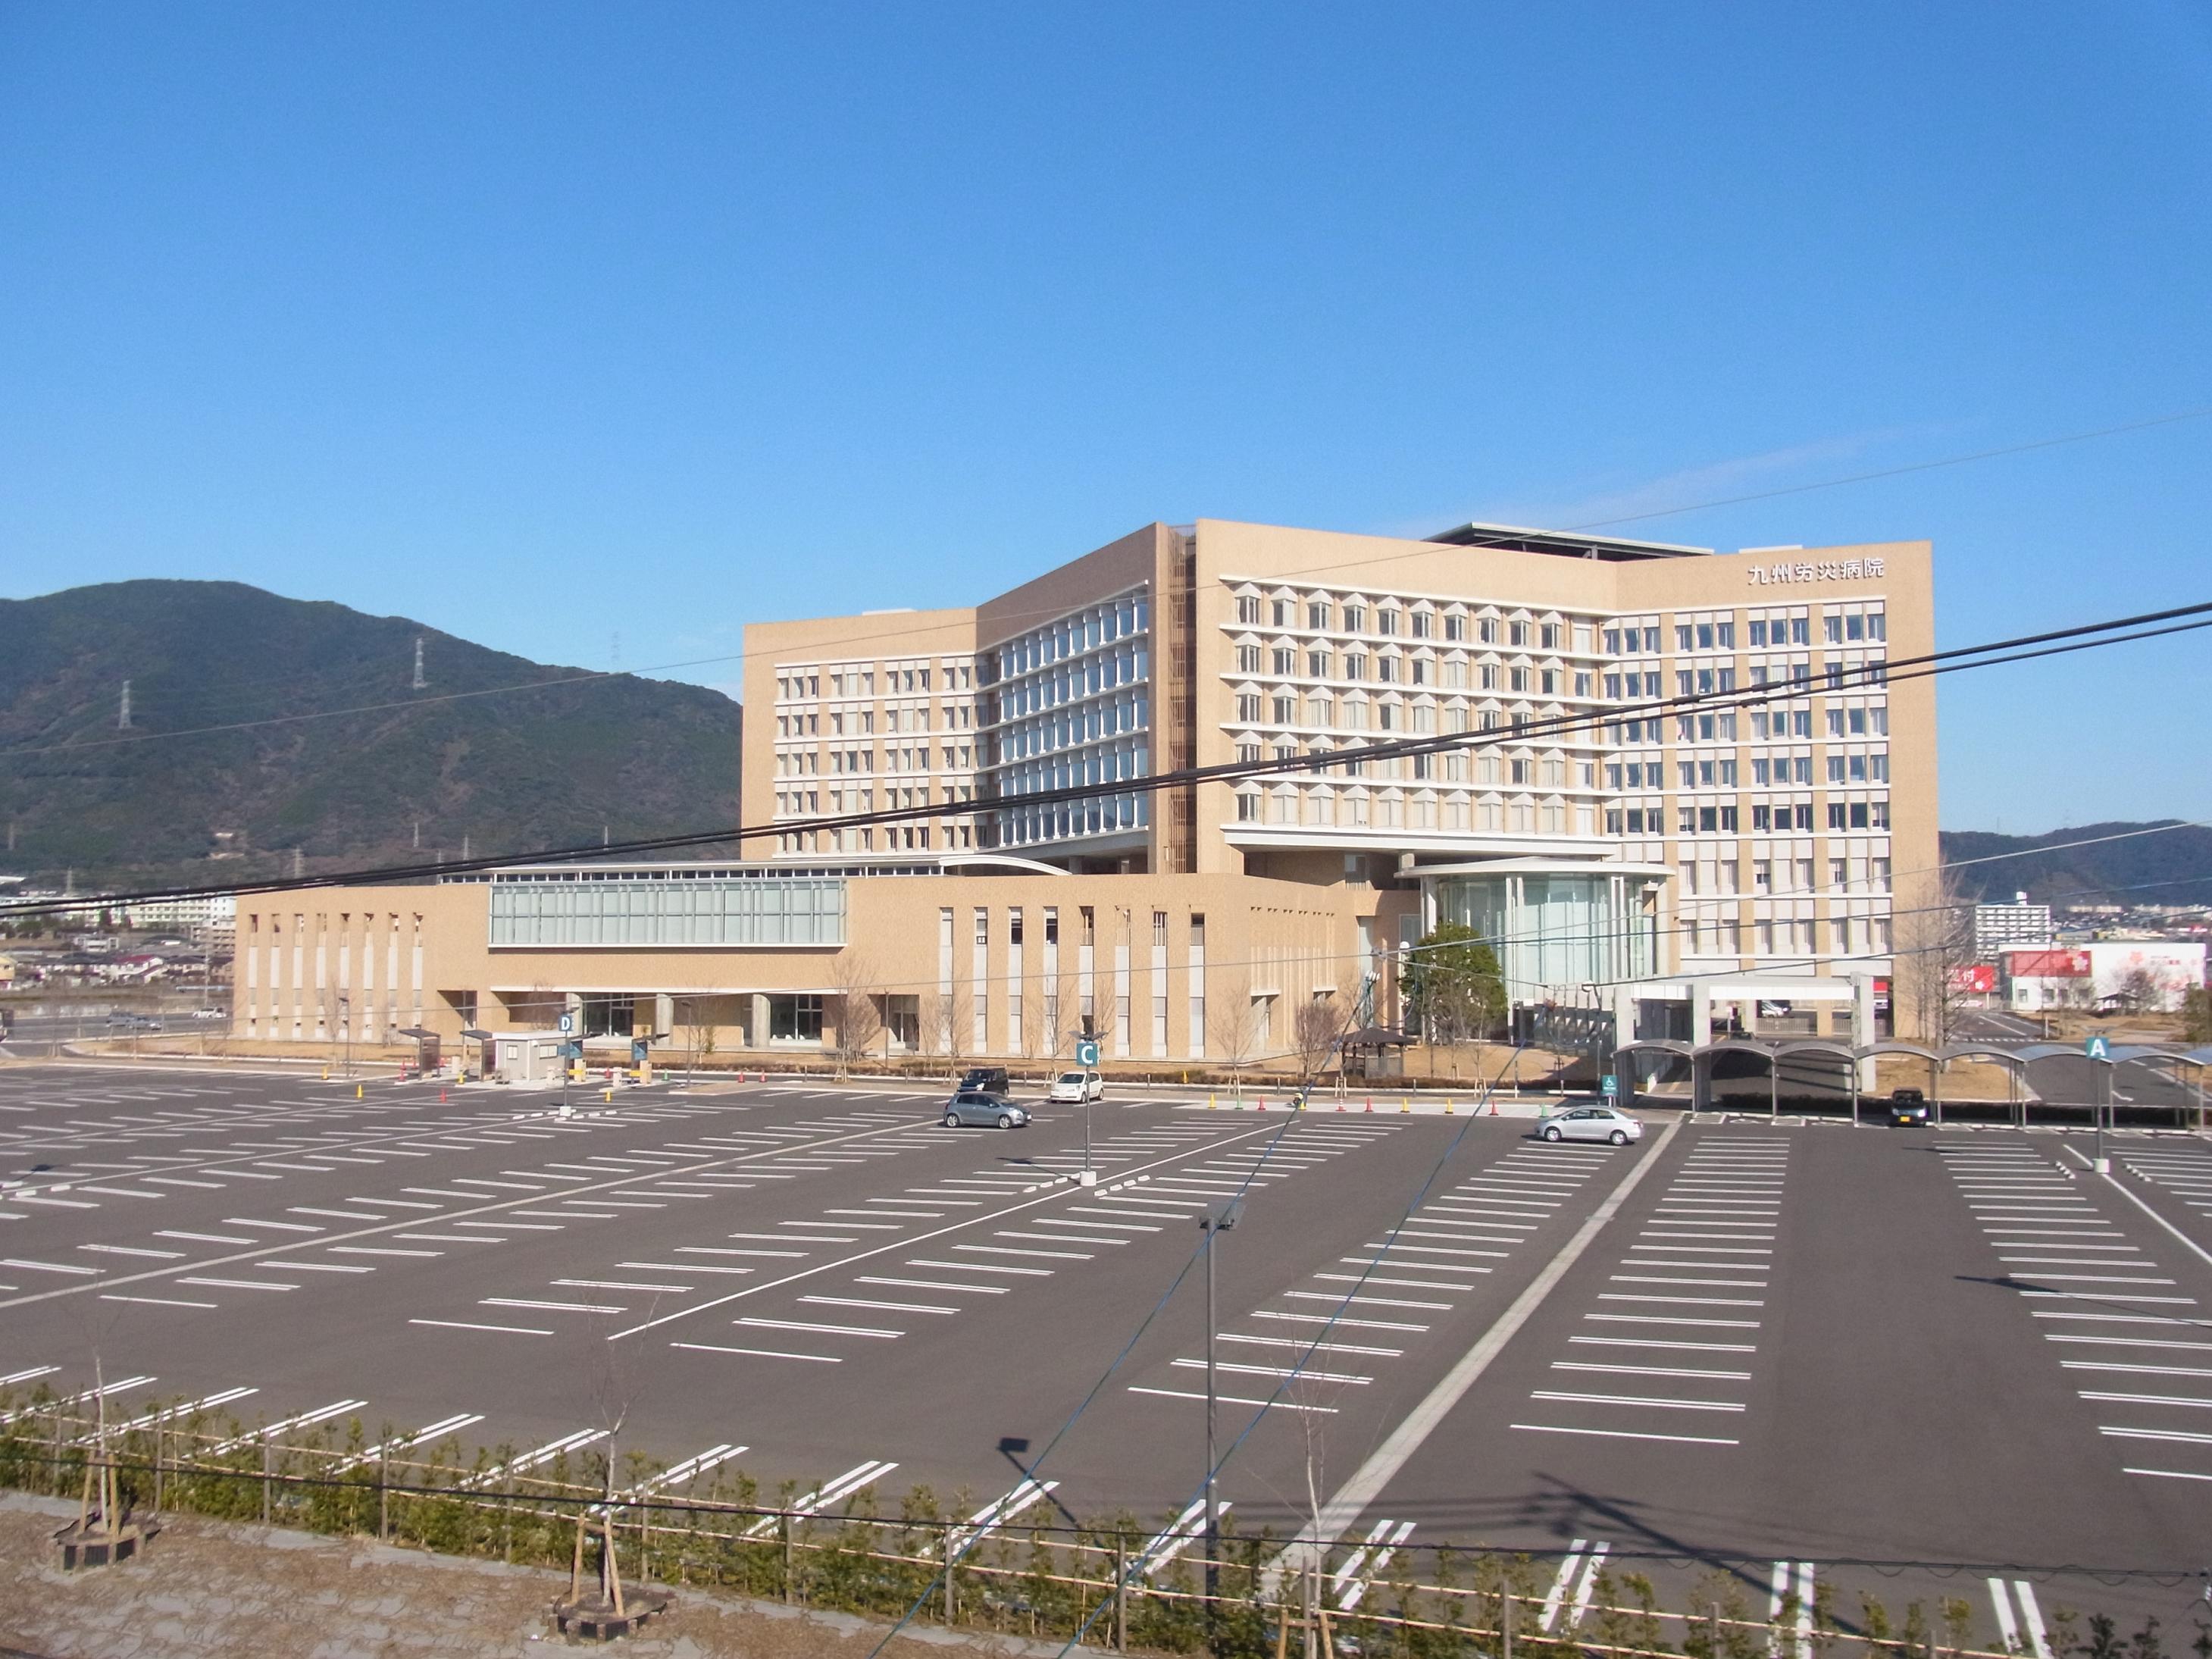 Hospital. 674m to the National Institute of Labor Health and Welfare Organization Kyushurosaibyoin (hospital)